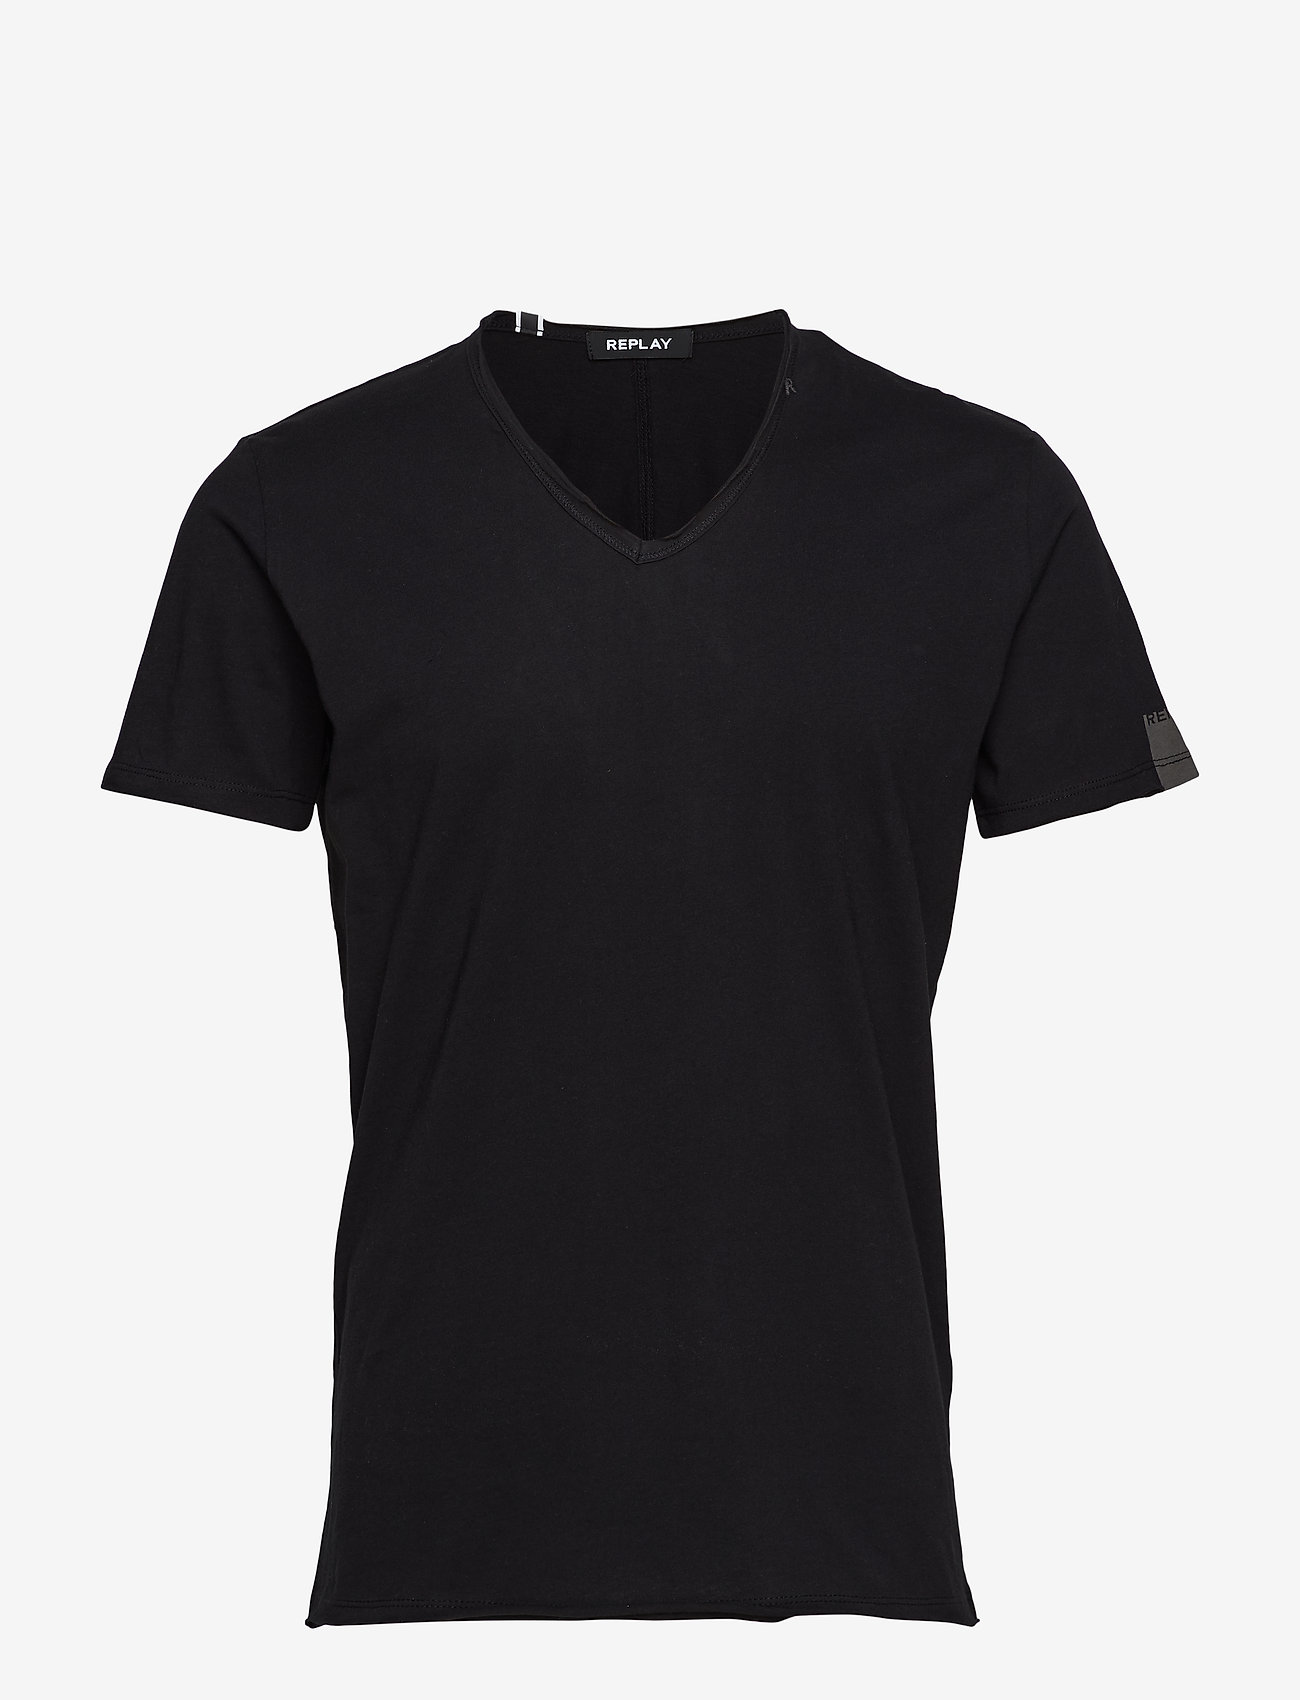 Replay - T-Shirt - lowest prices - black - 0